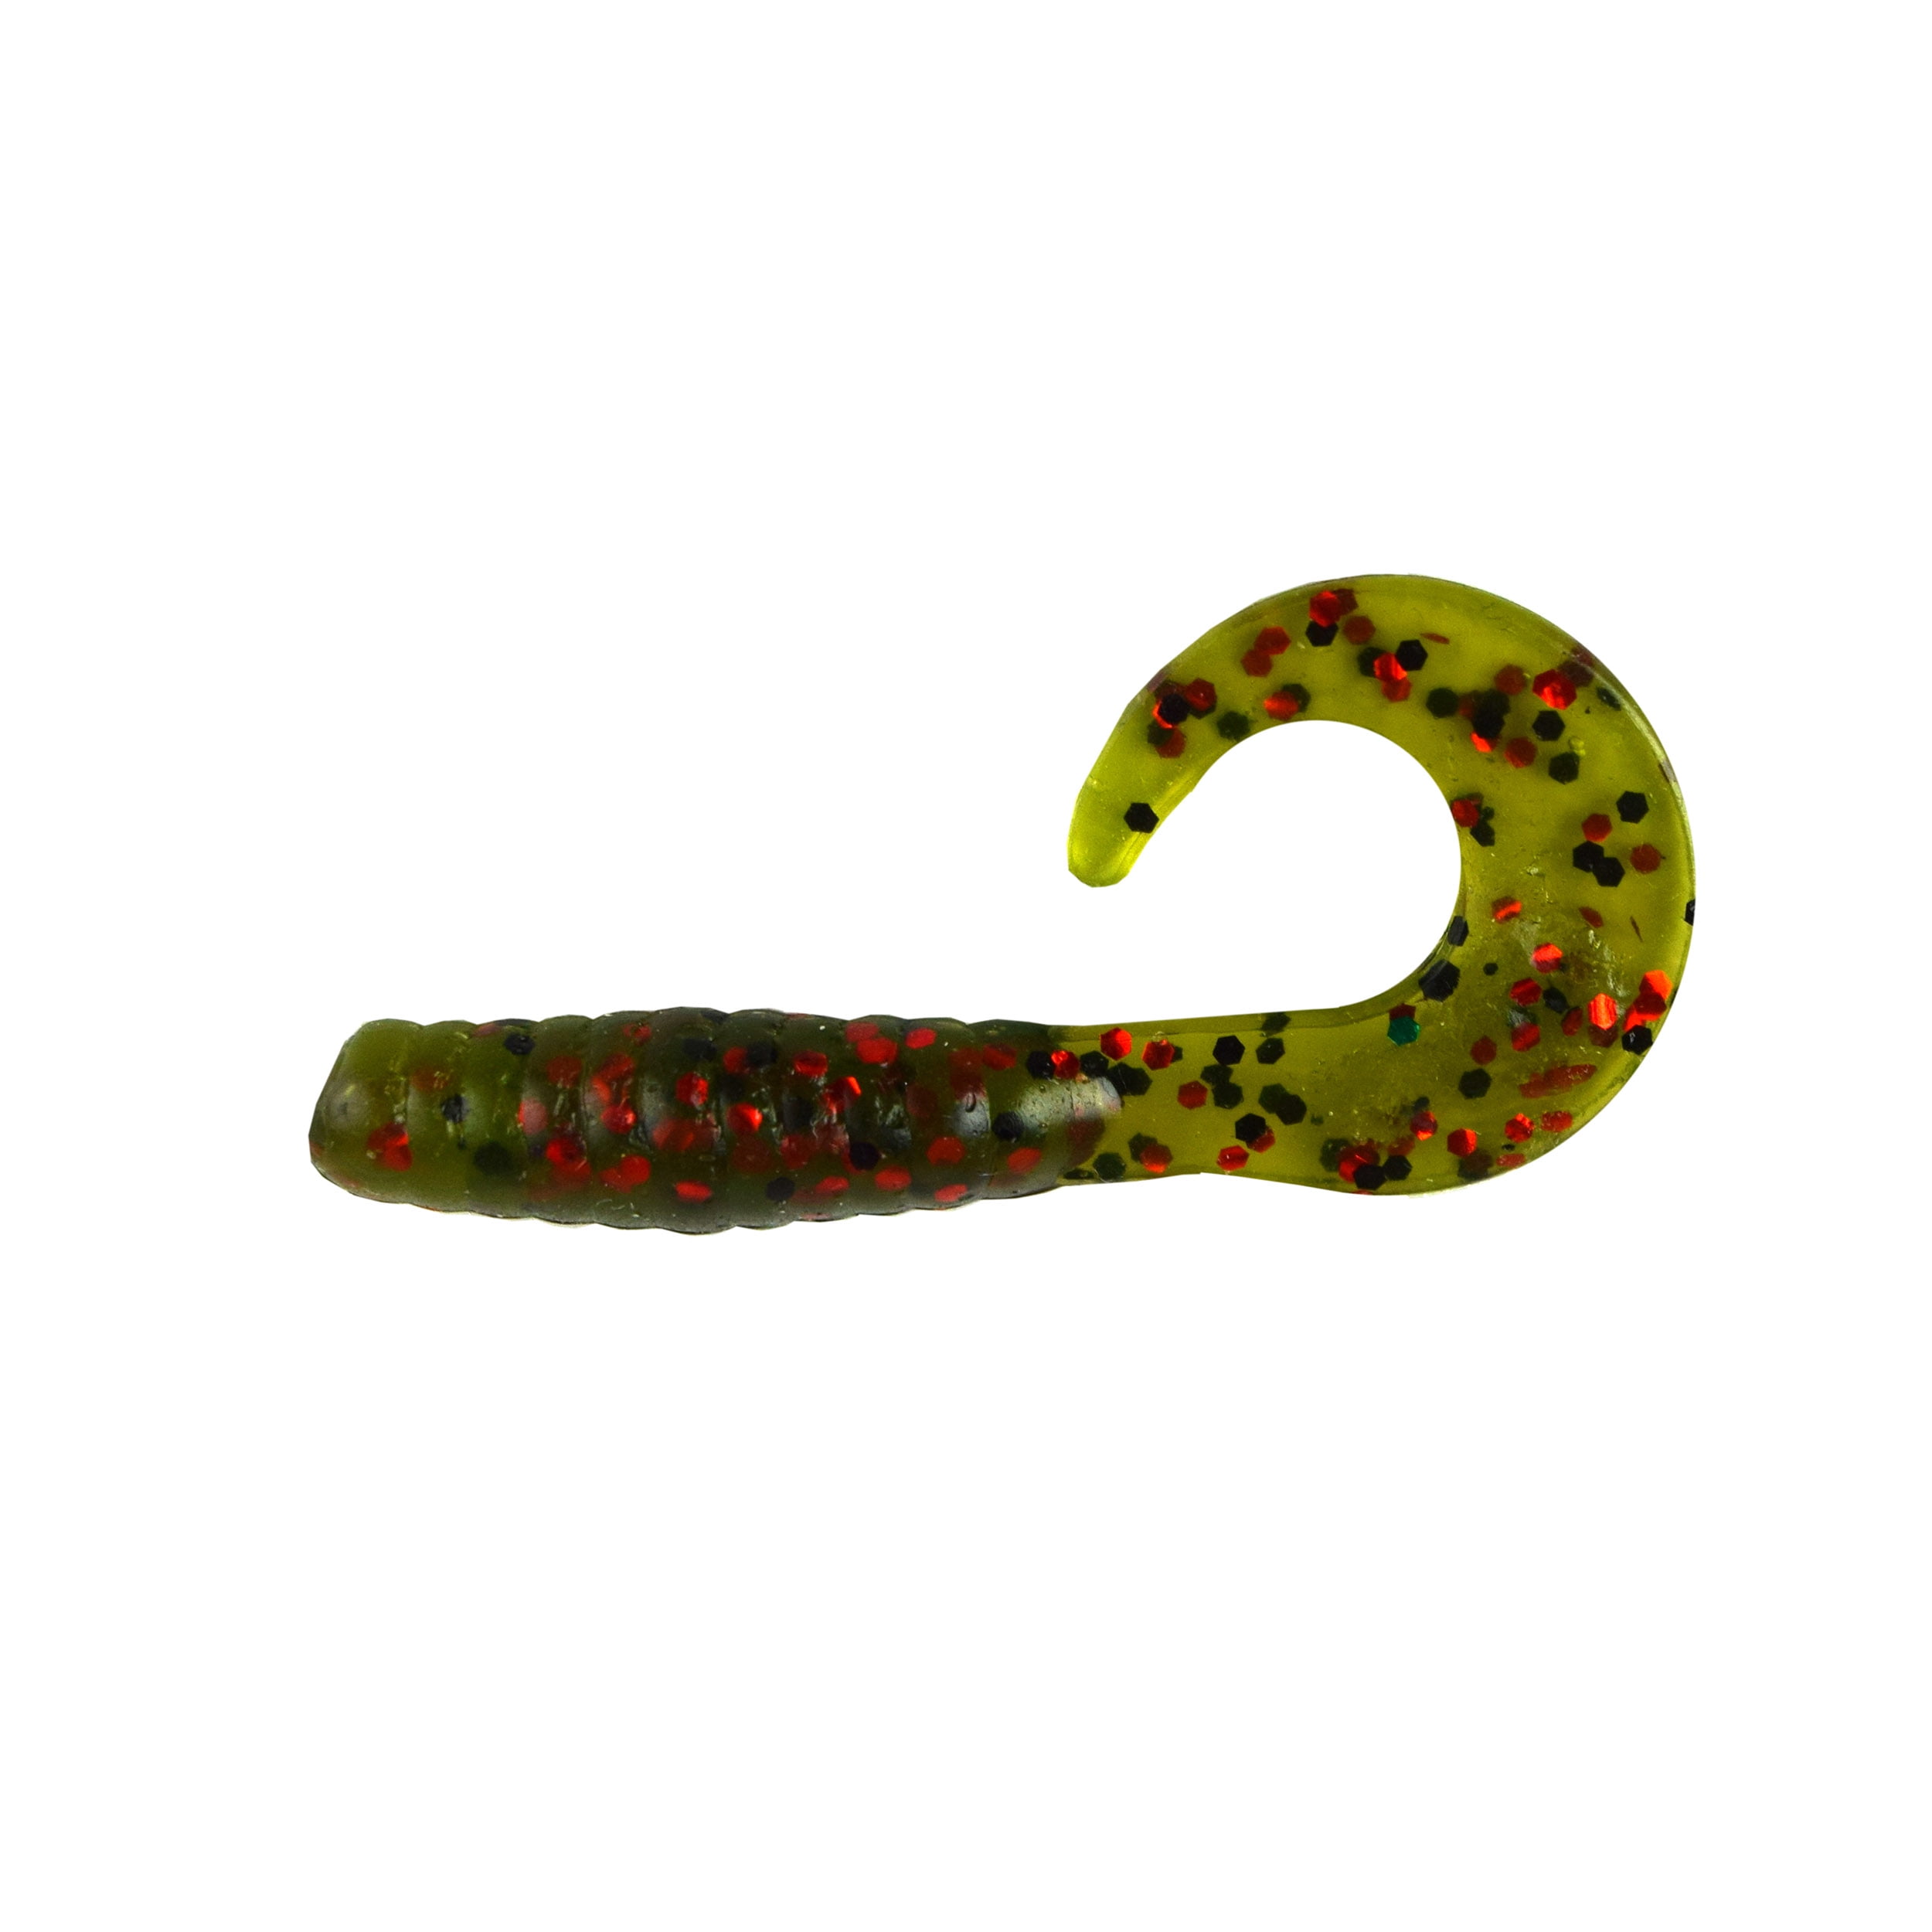 Tackle HD 70-Pack Grub Fishing Lures, 3-Inch Skirted Grub with Curly Tail,  Bulk Fishing Grubs for Crappie, Bass, Walleye, or Trout Bait, Freshwater or  Saltwater Swimbait, Watermelon Red 